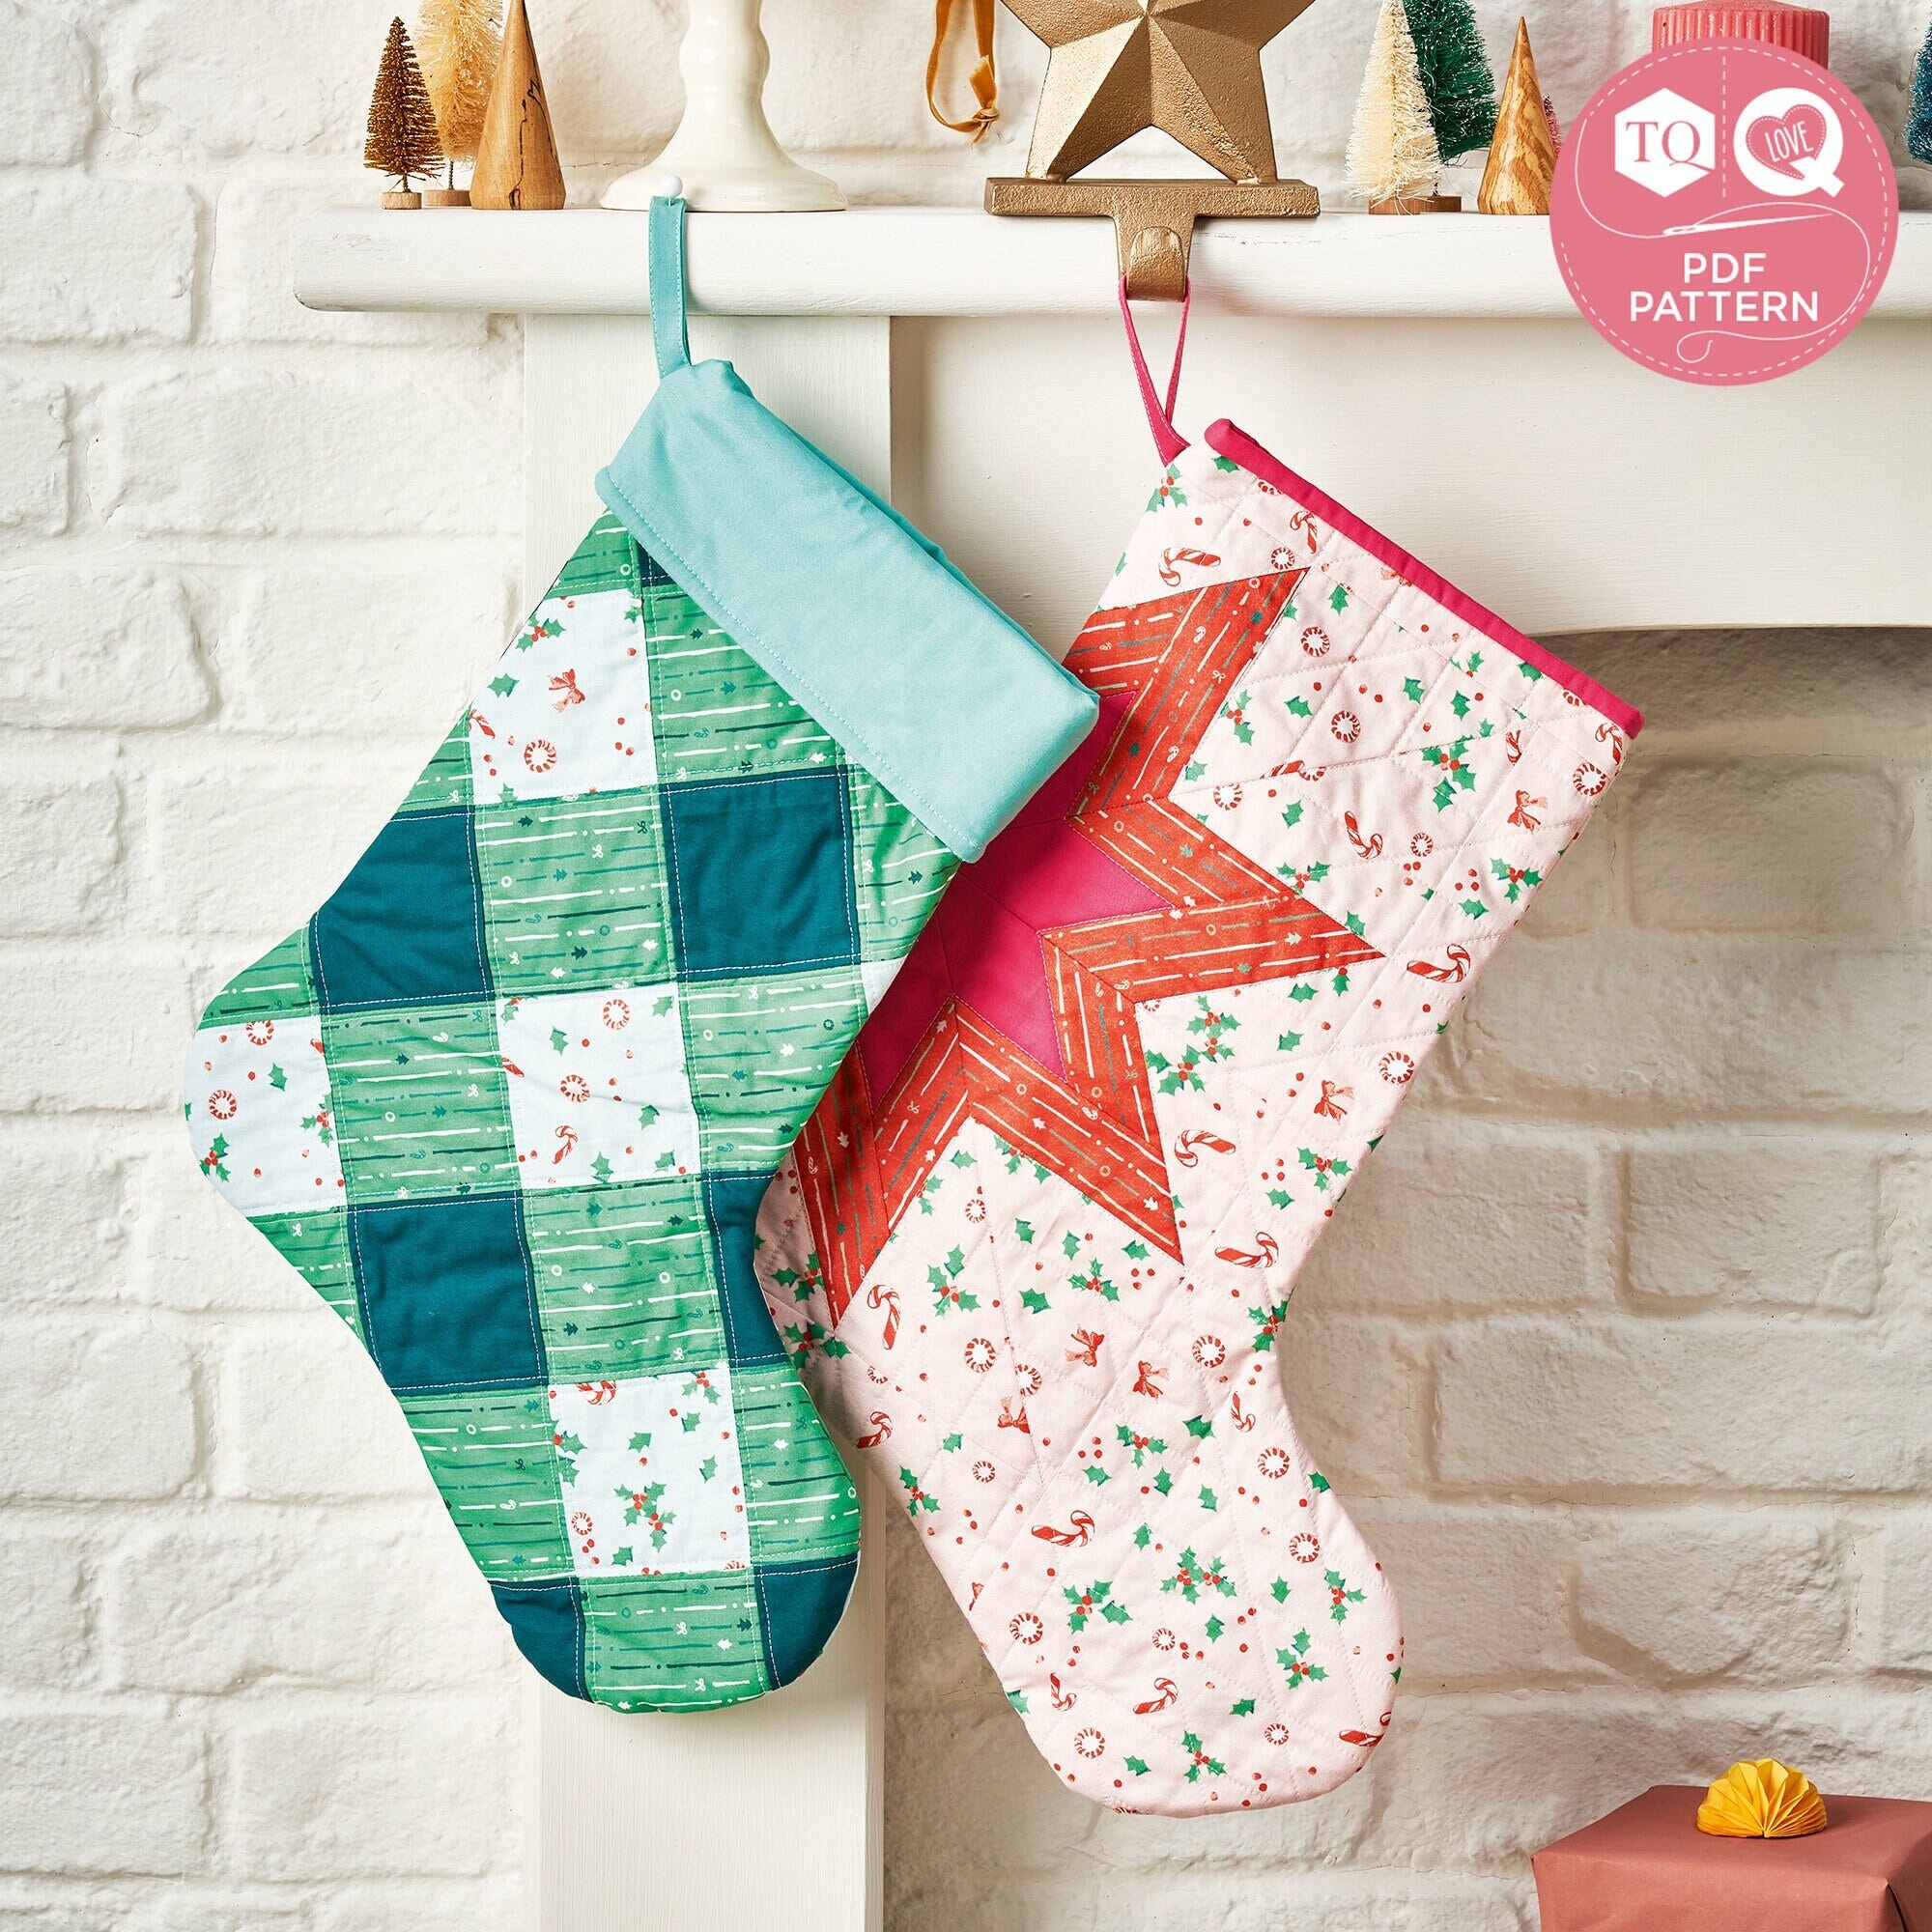 Patchwork Stocking Patterns, Christmas Stocking Pattern, Love Patchwork & Quilting, Digital Sewing Pattern, Instant Download